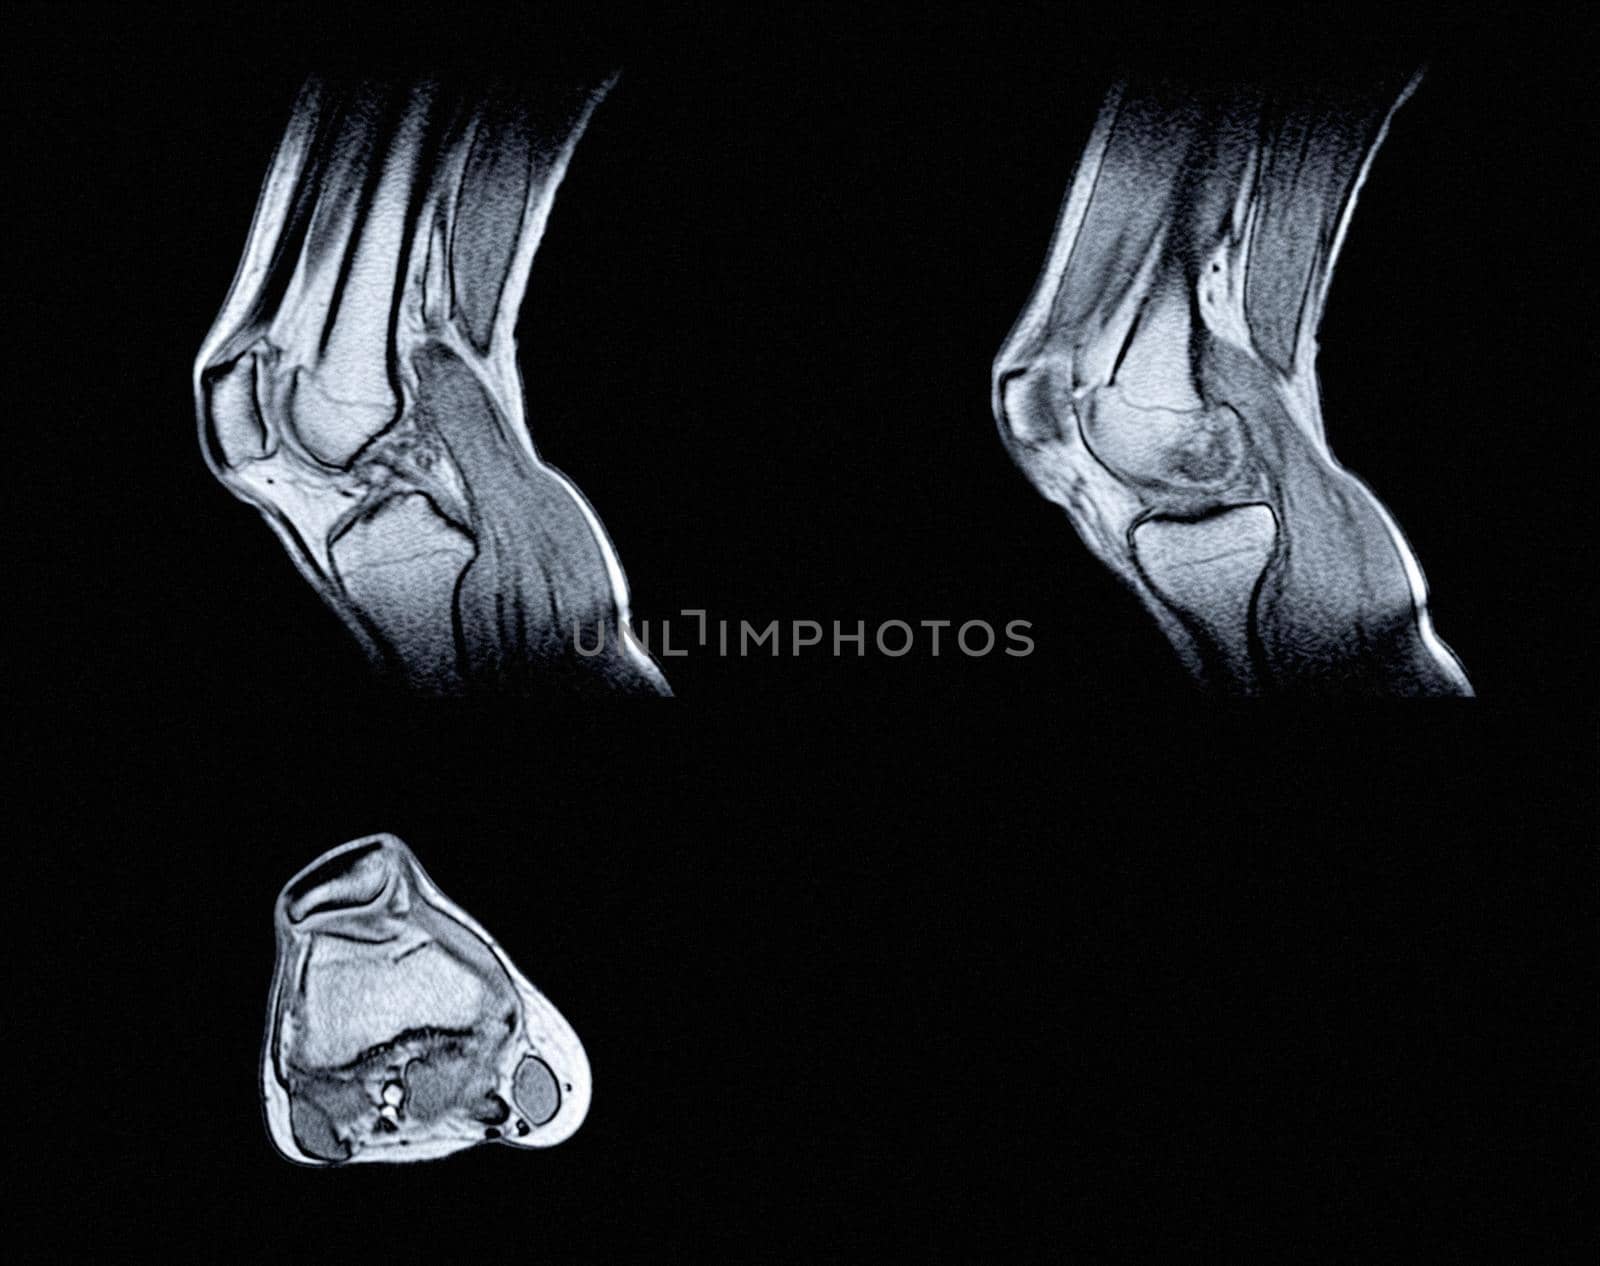 Magnetic resonance imaging (MRI) of right knee. Closed injury of the knee joint, with manifestations of arthrosis.